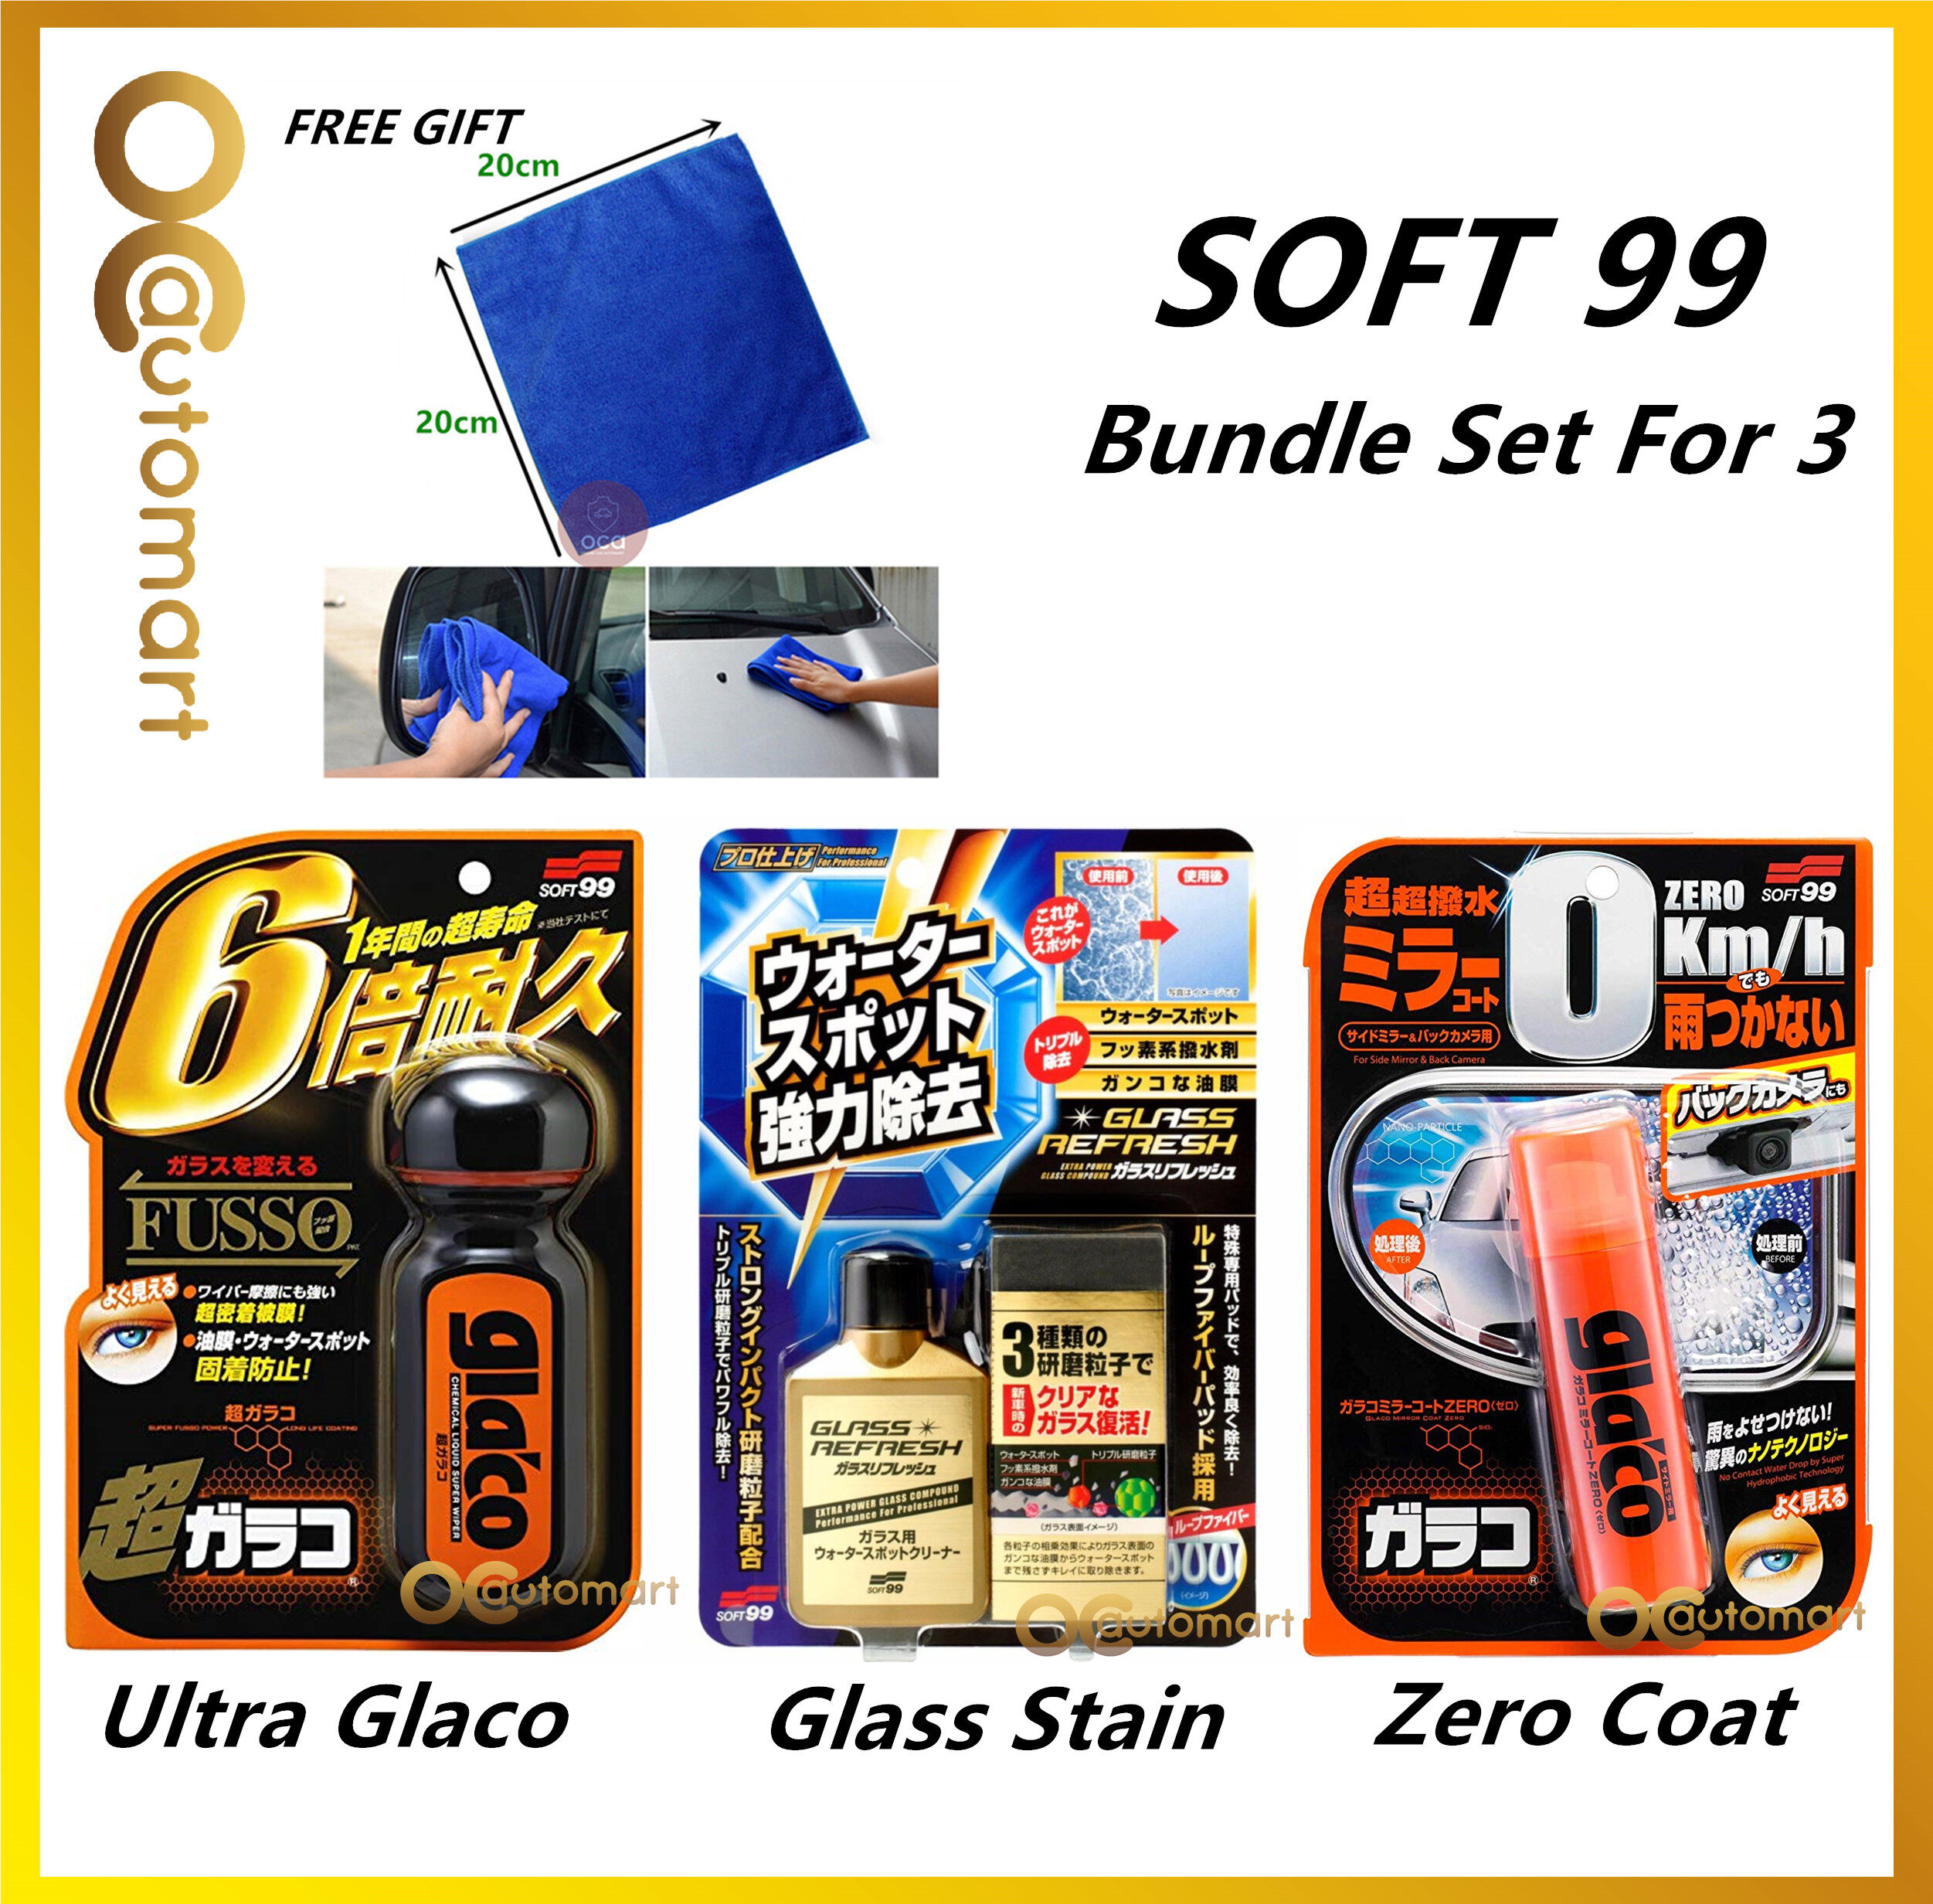 ( Free Gift ) Bundle Set For 3 Soft 99 /Soft99 - GLACO Series-NO1 BEST SELLING IN JAPAN ( ultra glaco + mirror coat zero + glass stain cleaner )